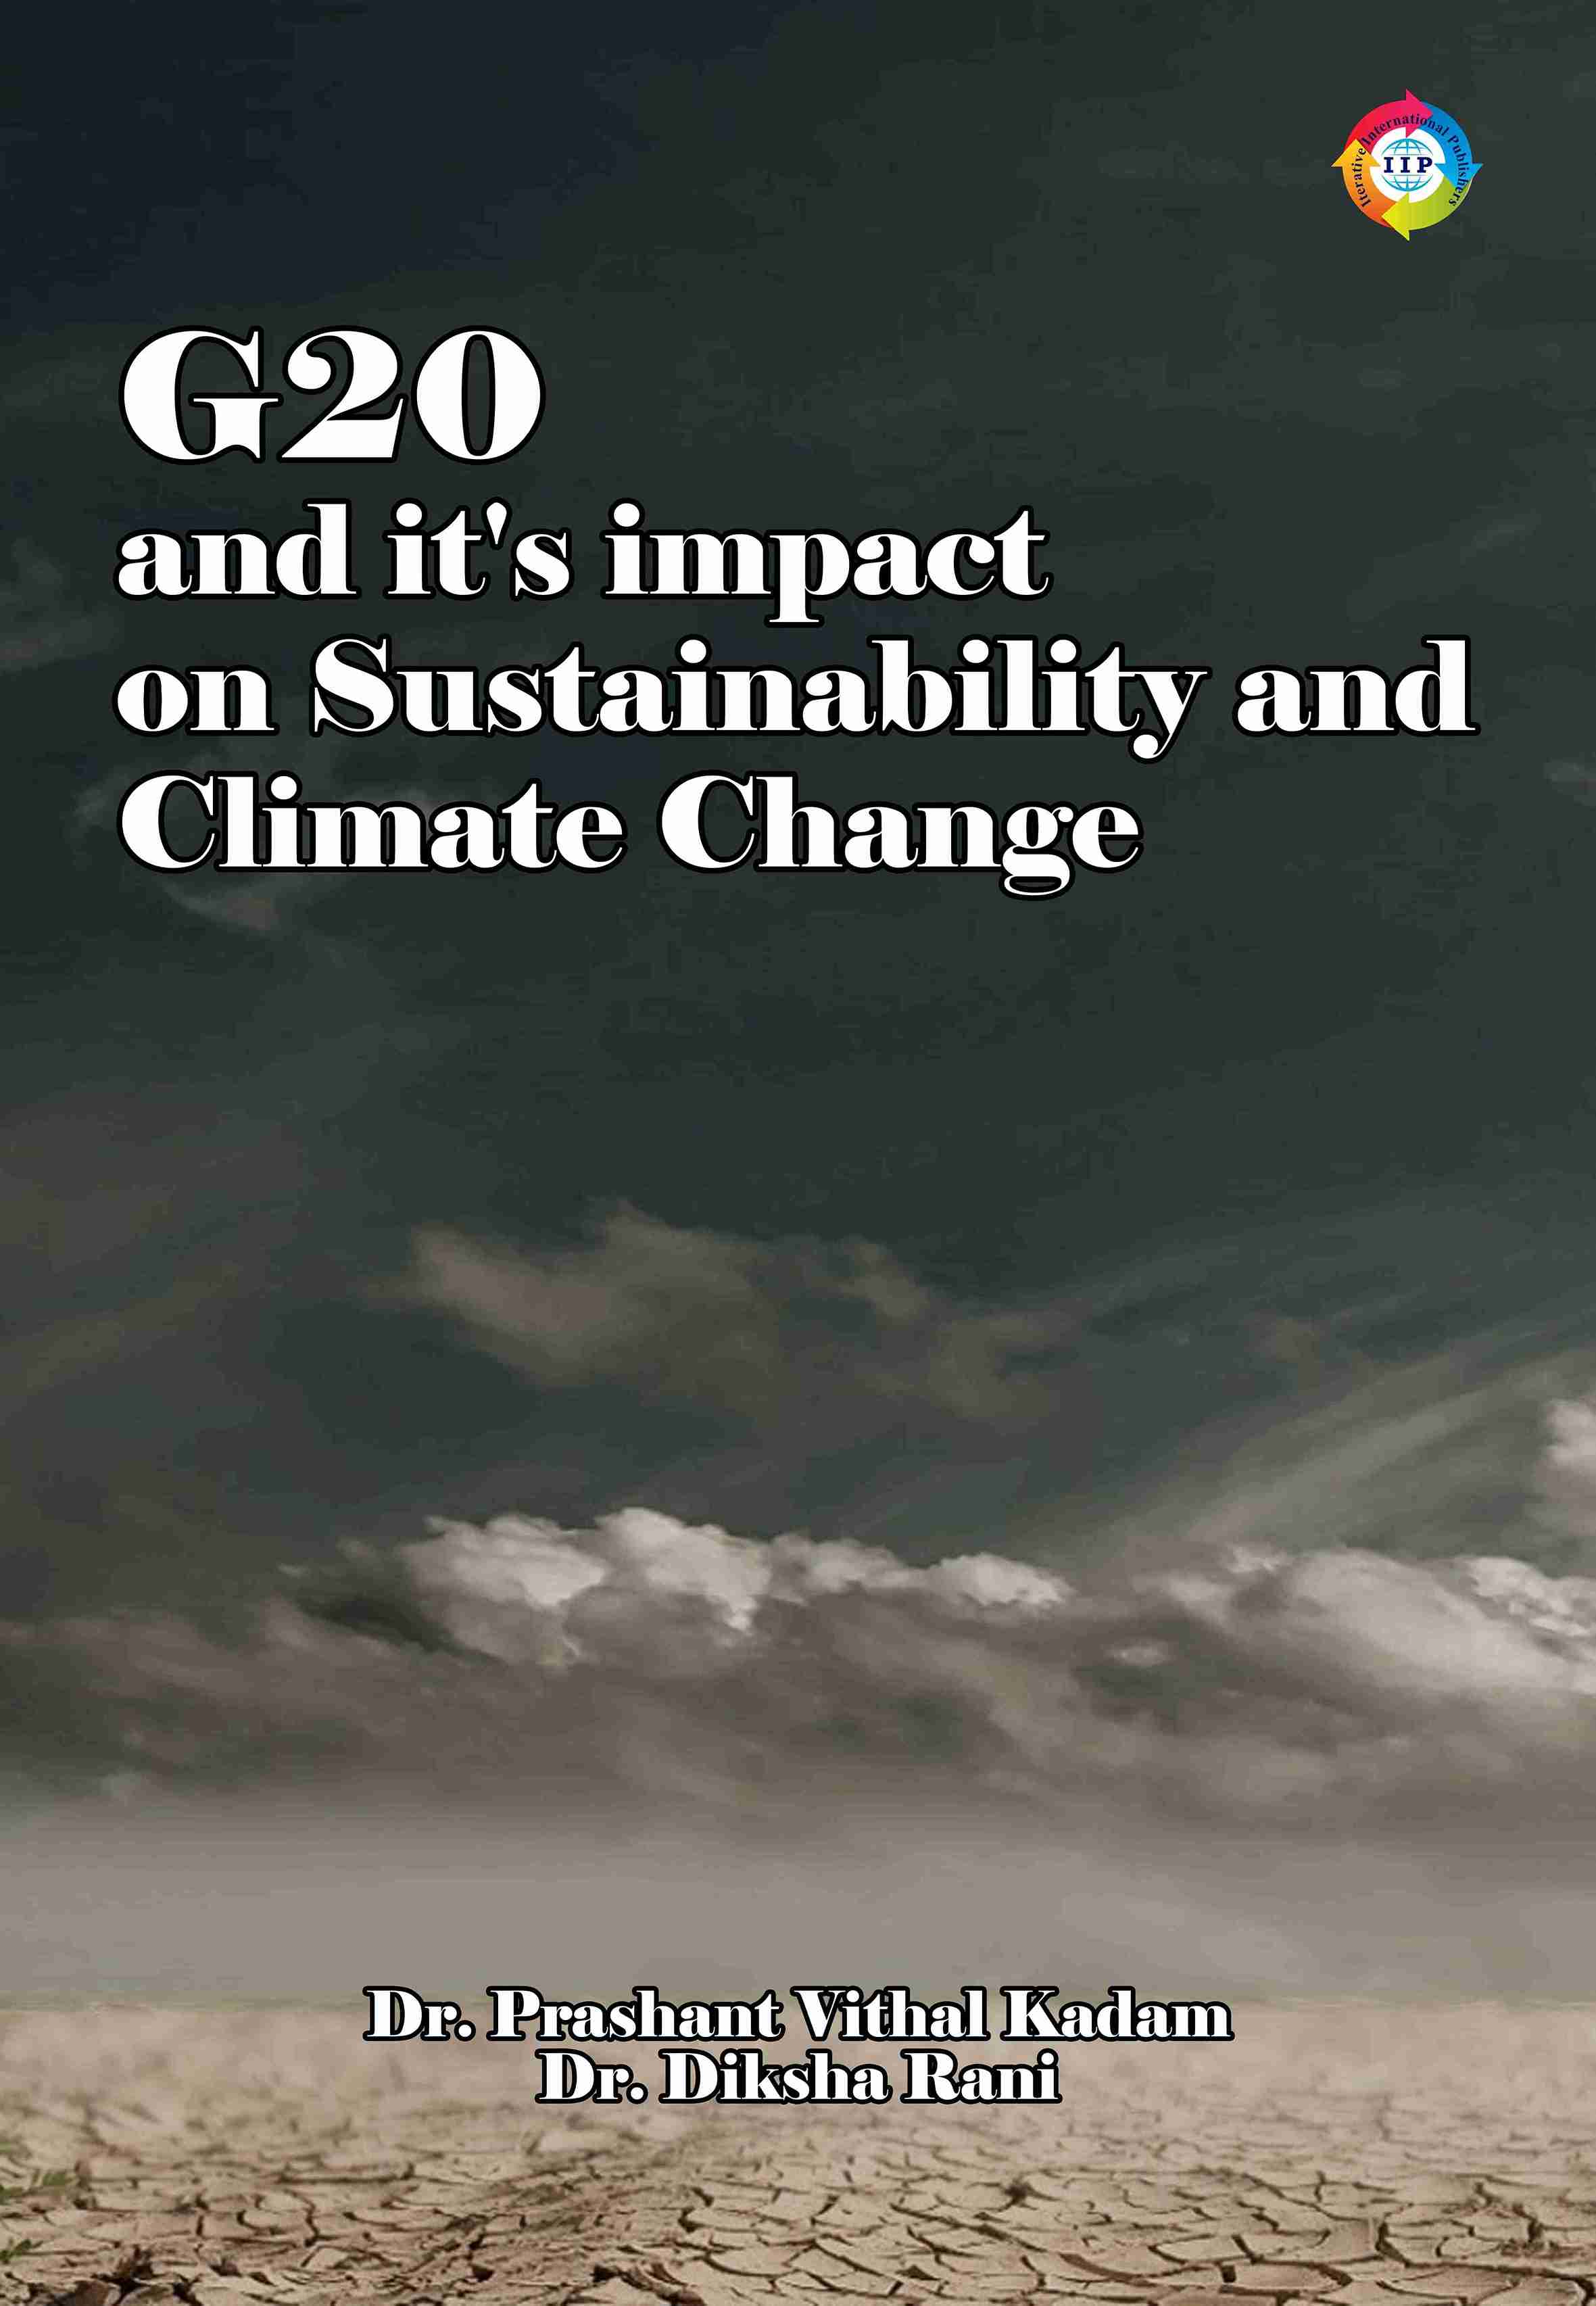 G20 AND ITS IMPACT ON SUSTAINABILITY AND CLIMATE CHANGE